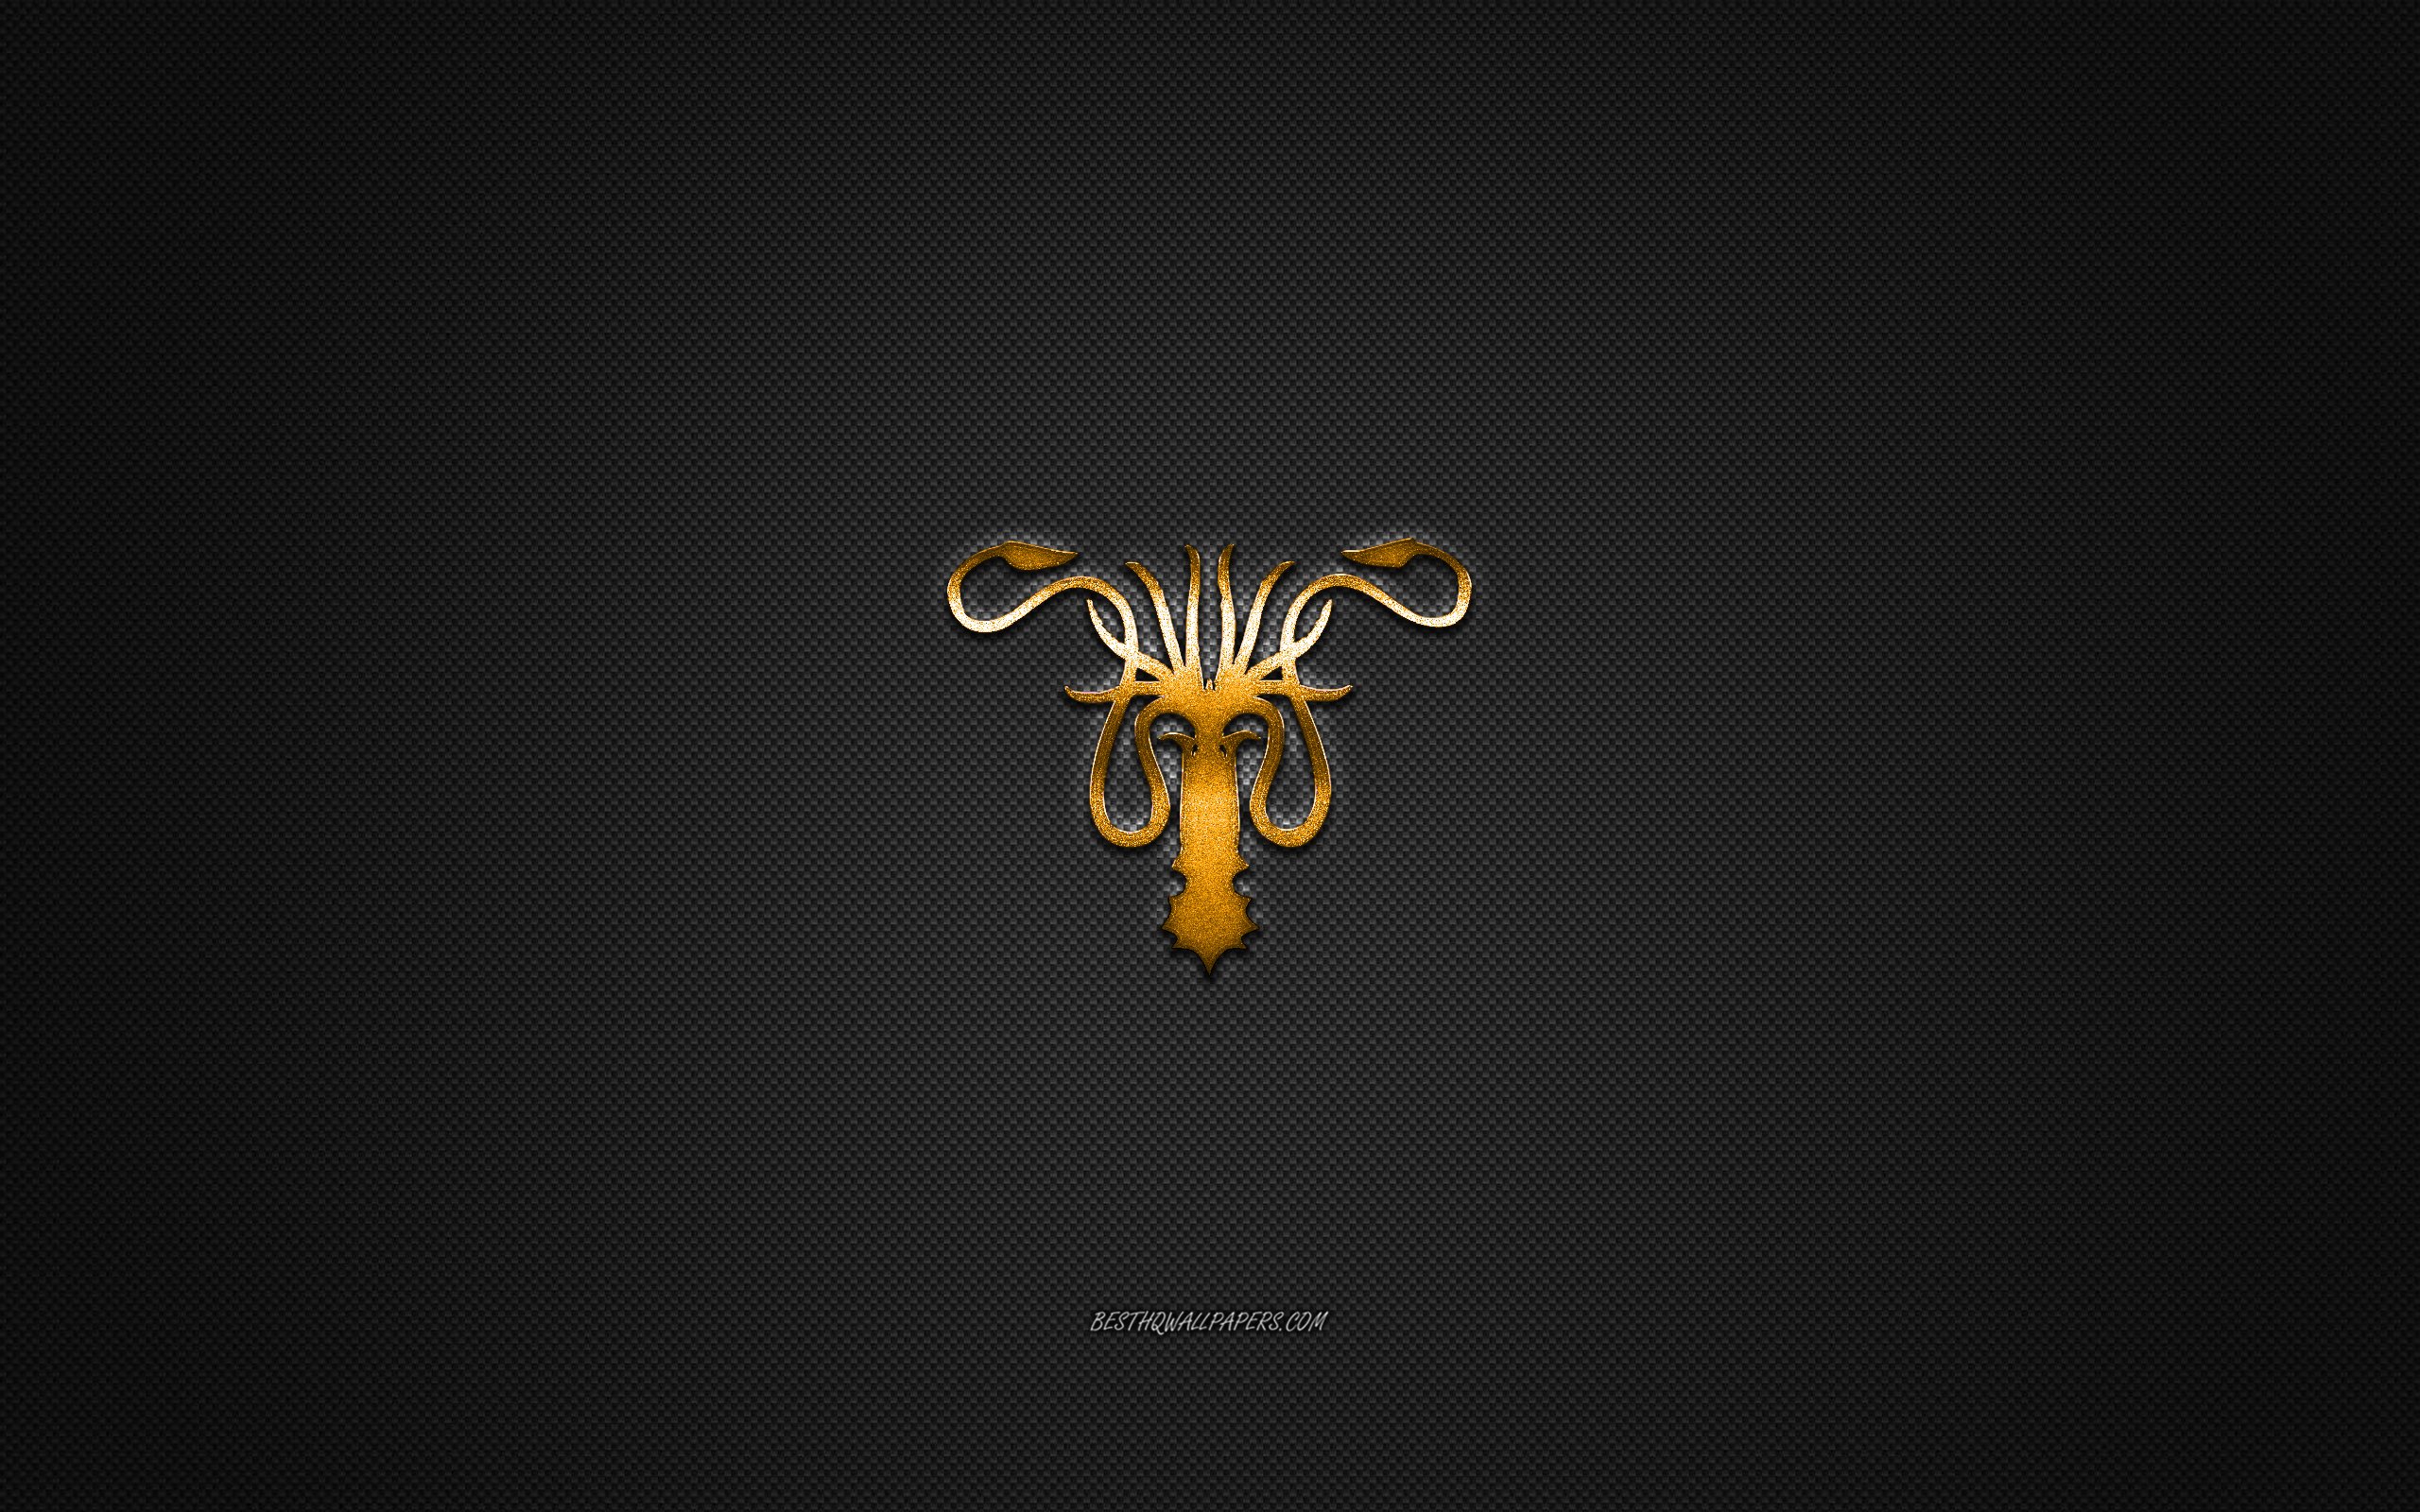 Download wallpapers House Greyjoy, Game Of Thrones, gray carbon background,  House Greyjoy logo, carbon fiber texture, House Greyjoy emblem, House  Greyjoy metal sign for desktop with resolution 2560x1600. High Quality HD  pictures